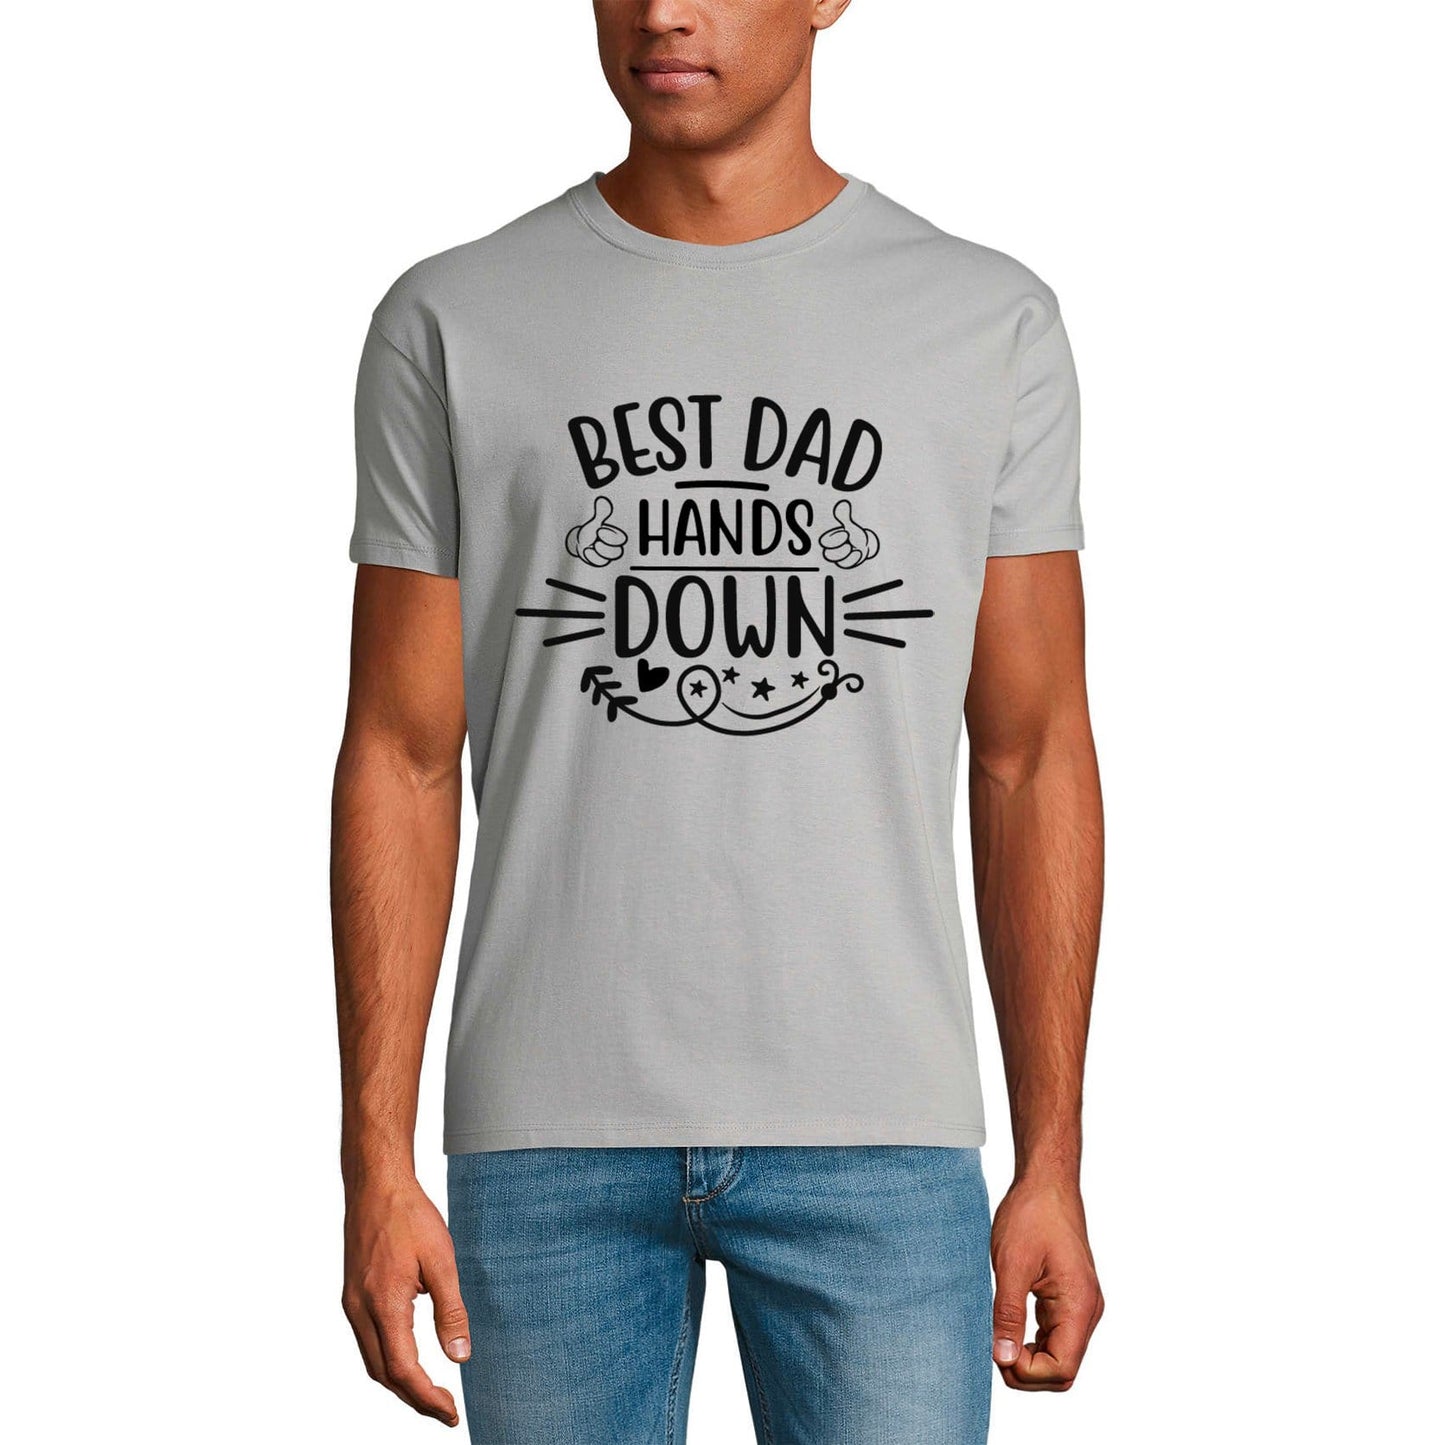 ULTRABASIC Men's Graphic T-Shirt Best Dad Hands Down - Funny Daddy's Shirt